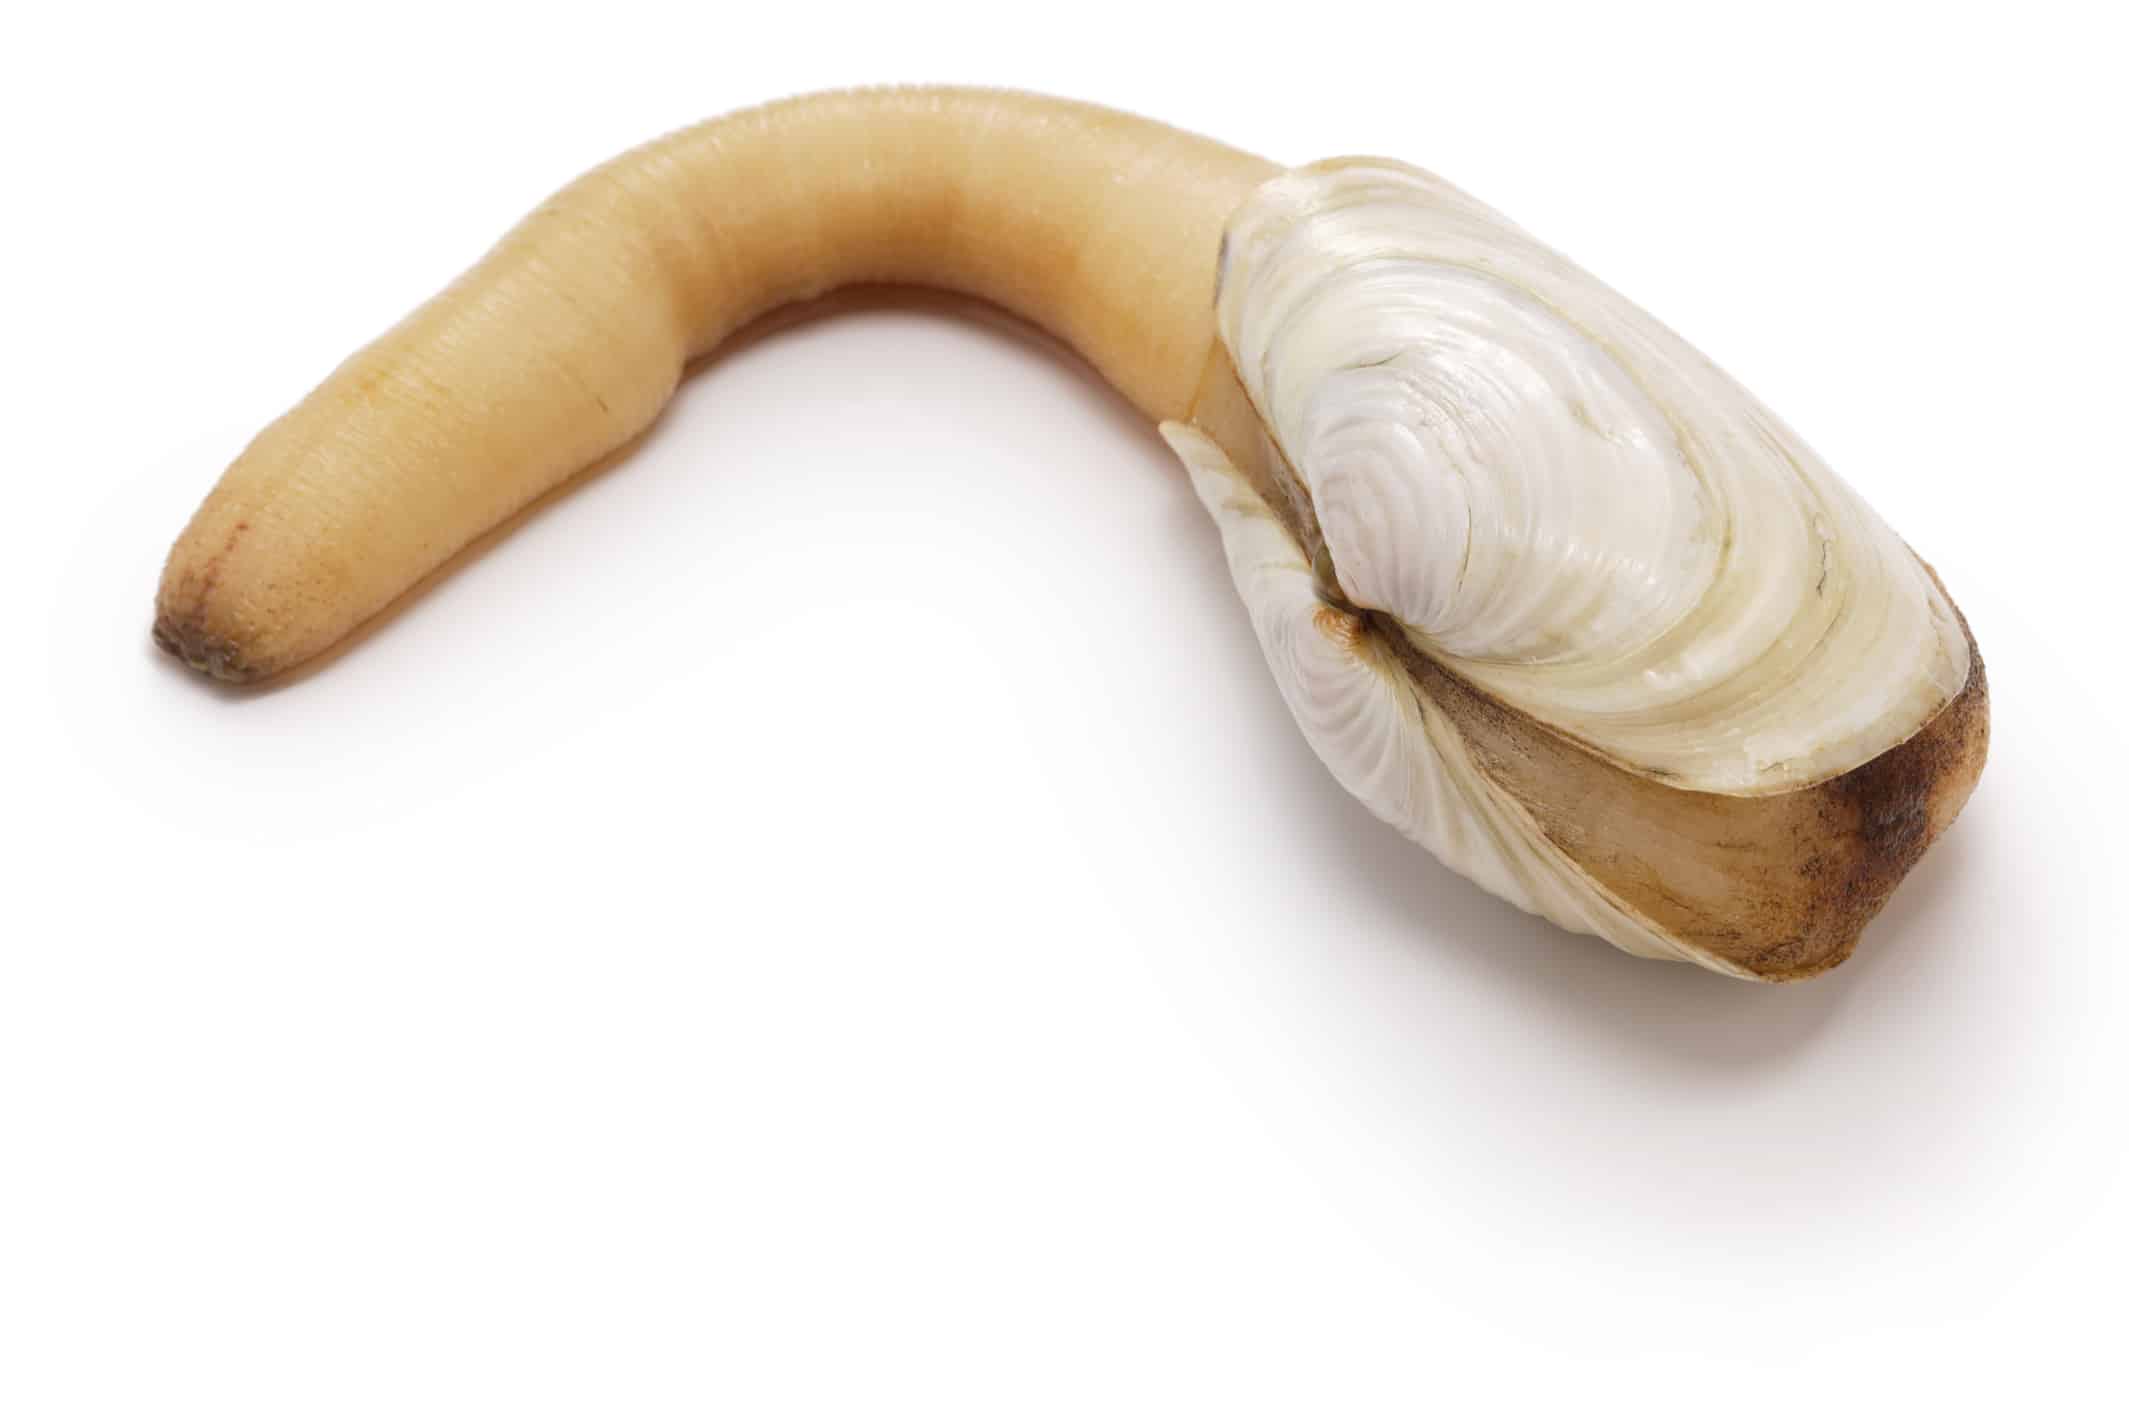 Discover The World's Largest Geoduck - AZ Animals